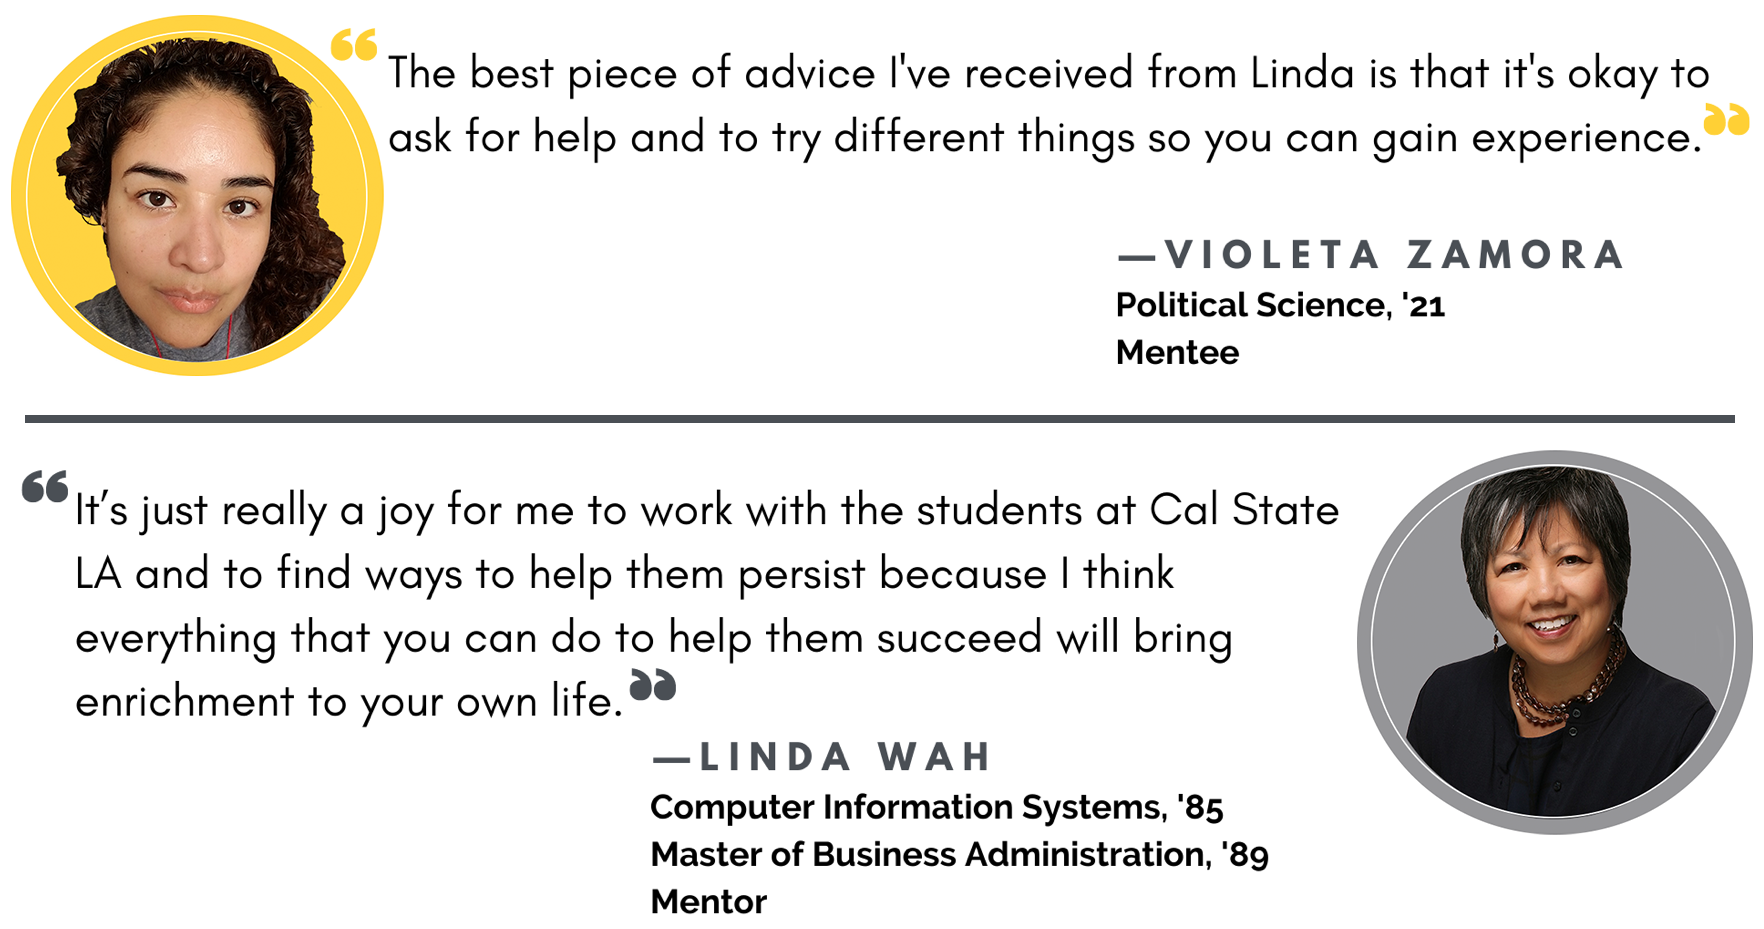 Quotes from Linda Wah and Violeta Zamora.  Violeta is quoted as saying, "The best piece of advice I've received from Linda is that it's okay to ask for help and to try different things so you can gain experience.  Linda's quote: "It's just really a joy fo